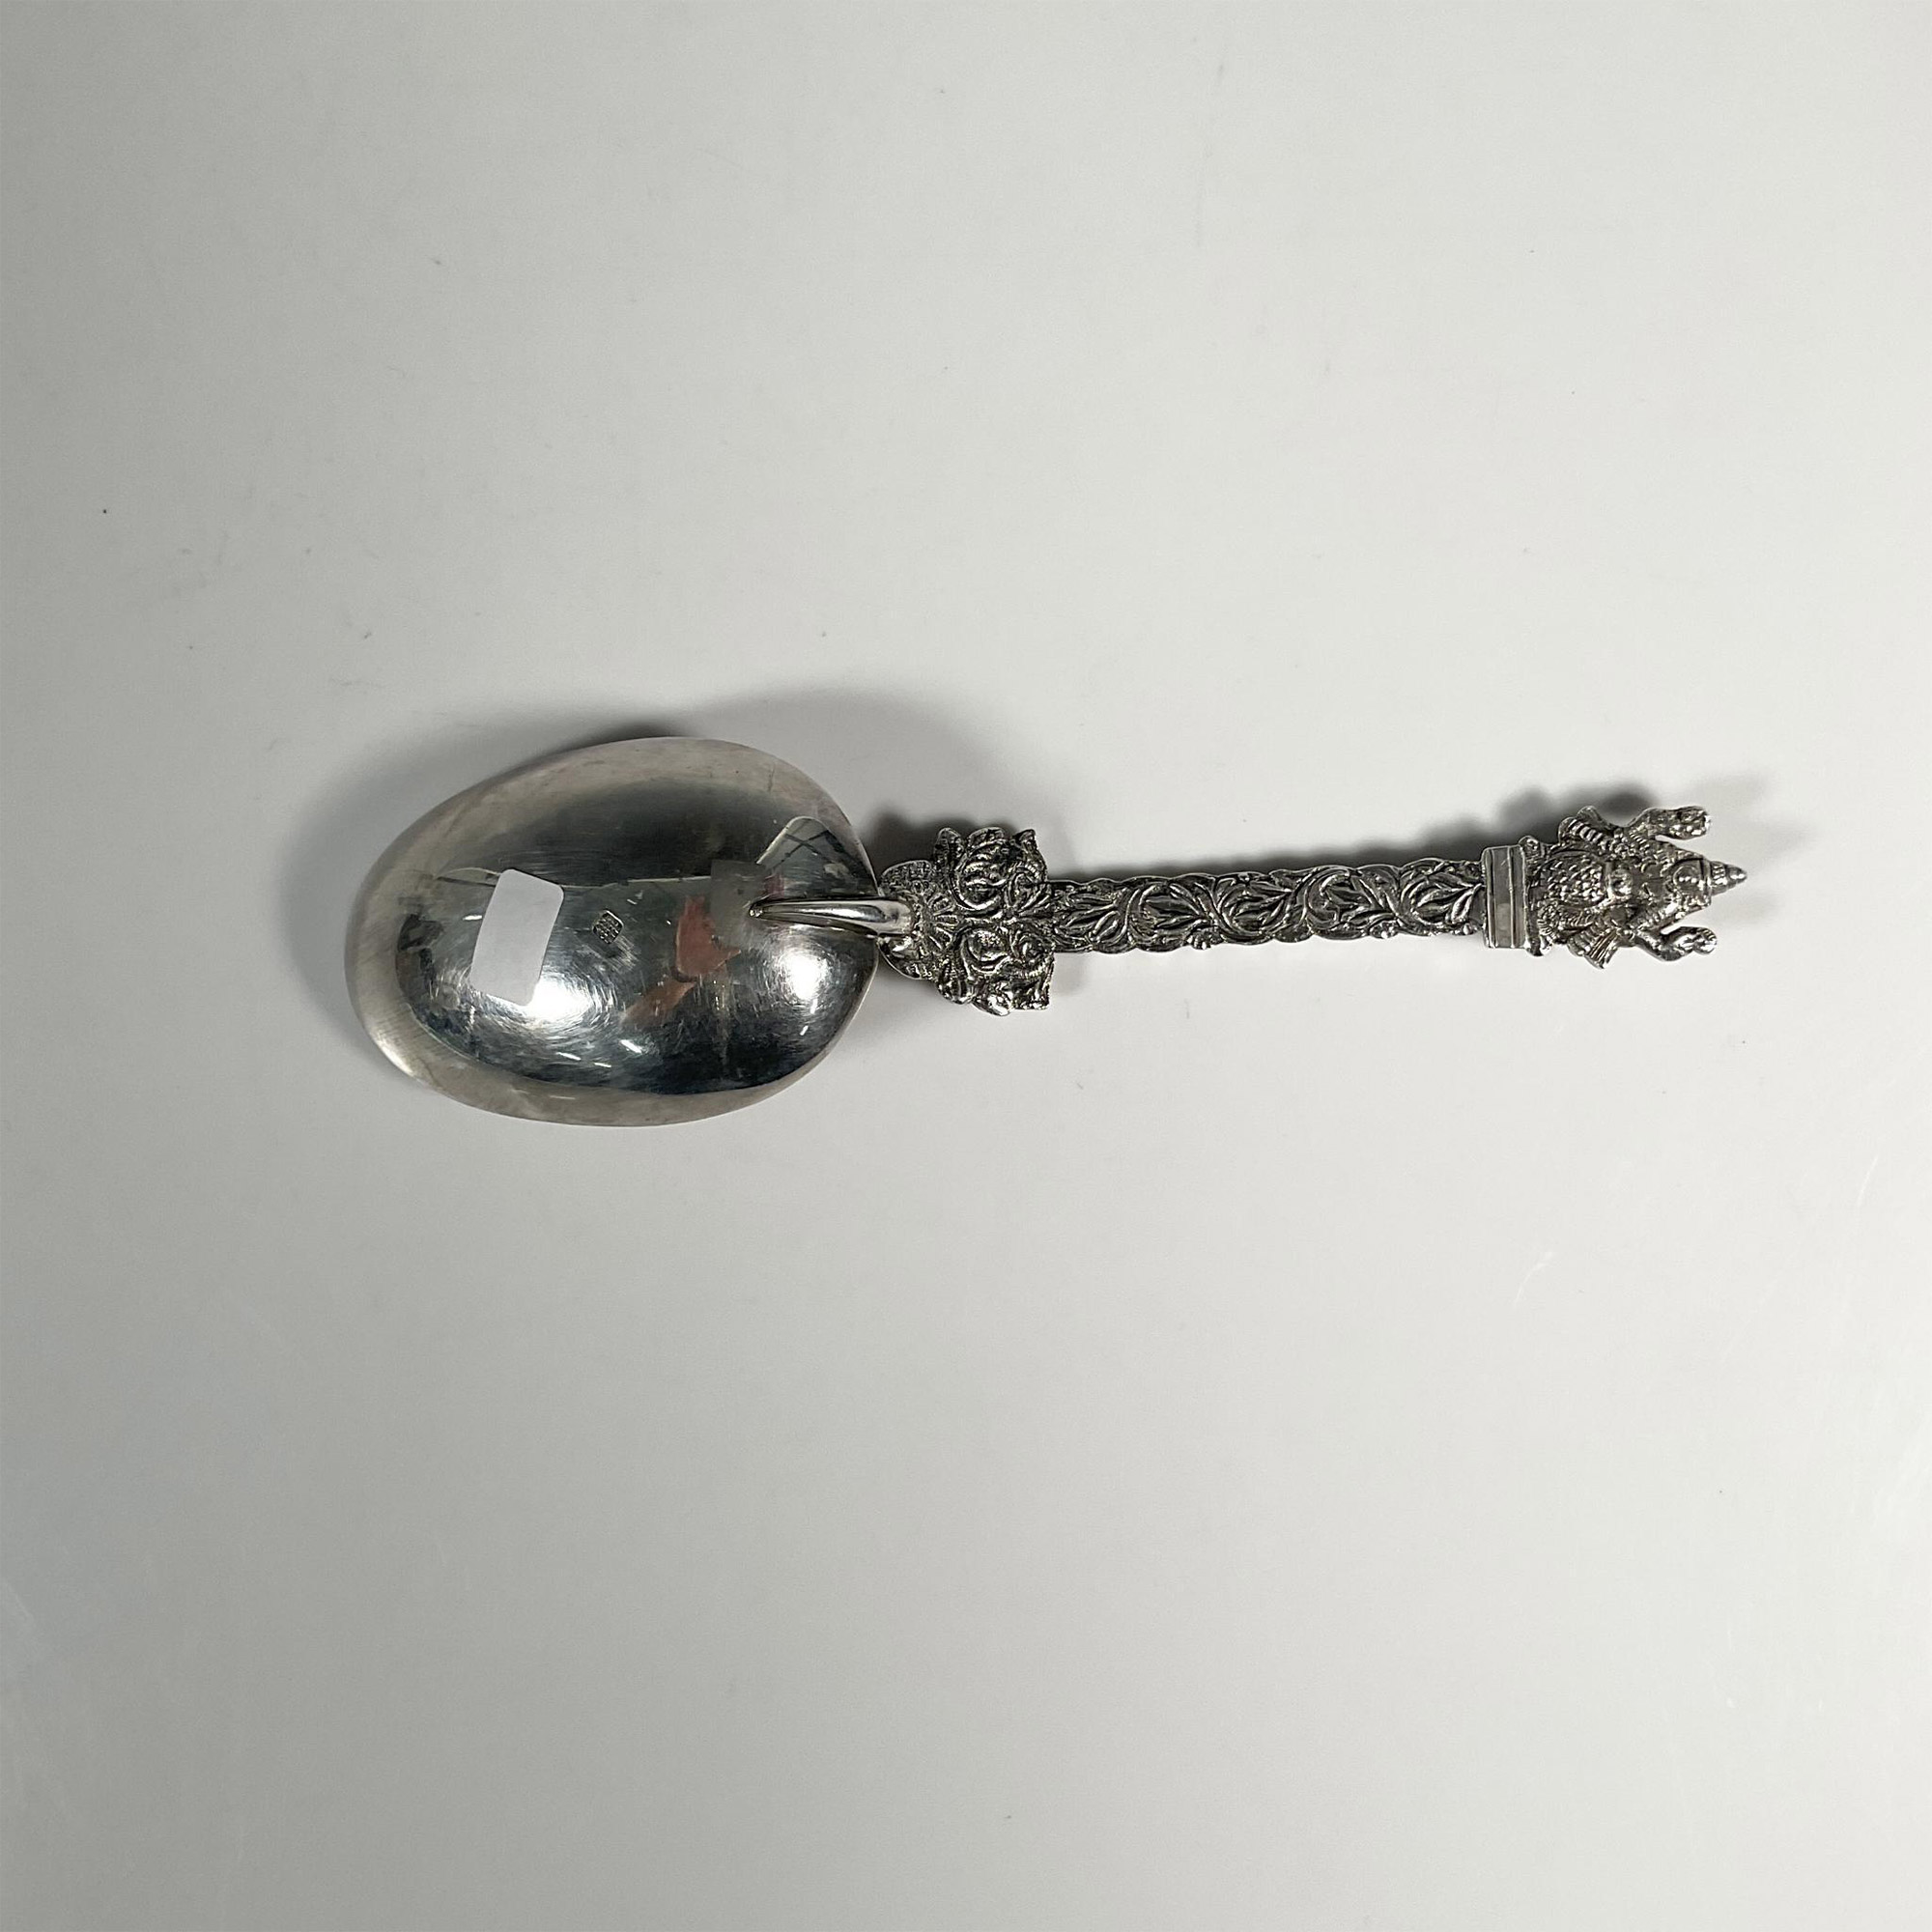 South East Asian Hallmarked Silver Spoon - Image 2 of 3